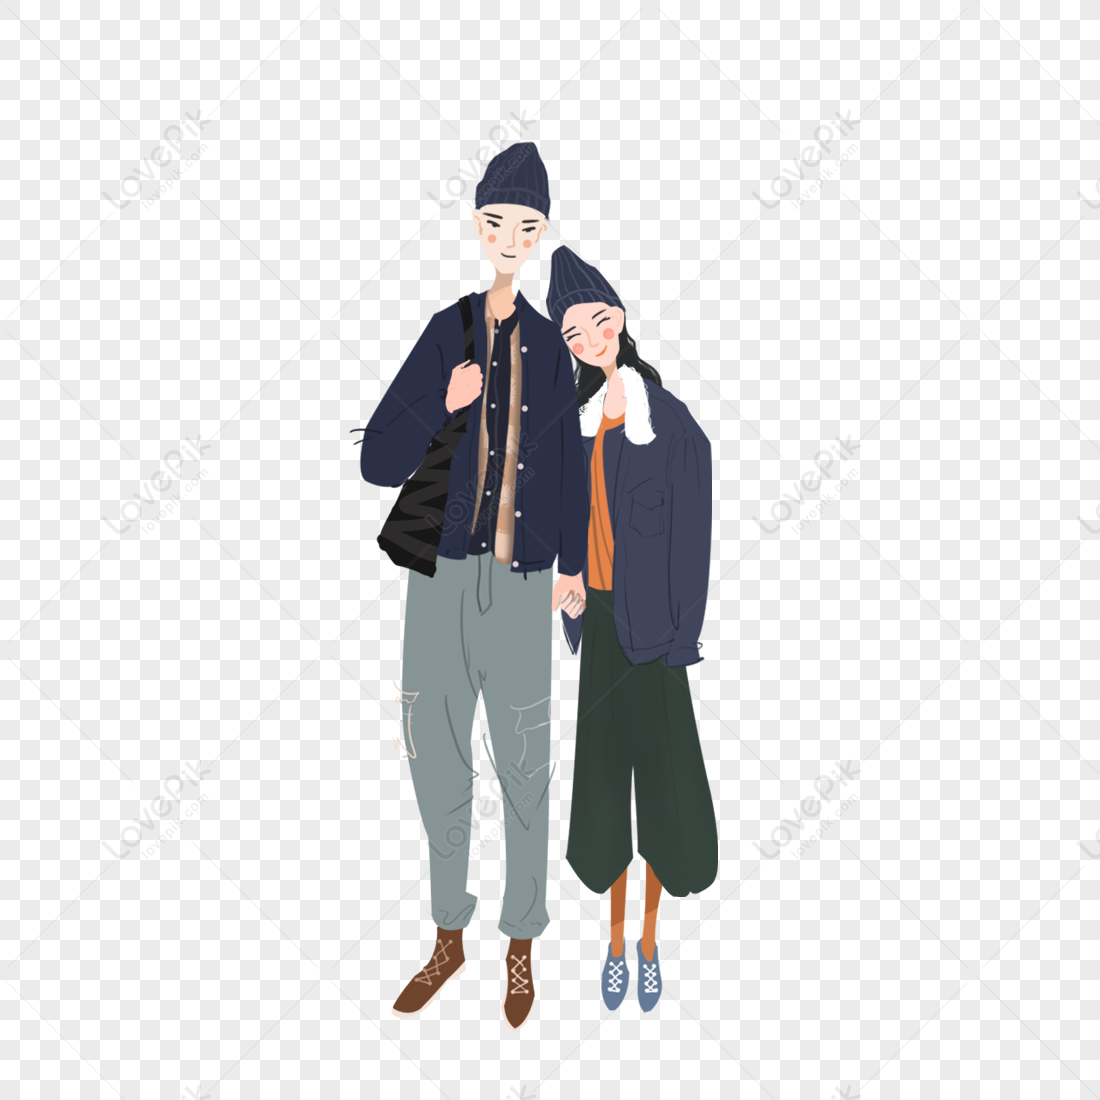 Lovers PNG Image Free Download And Clipart Image For Free Download ...